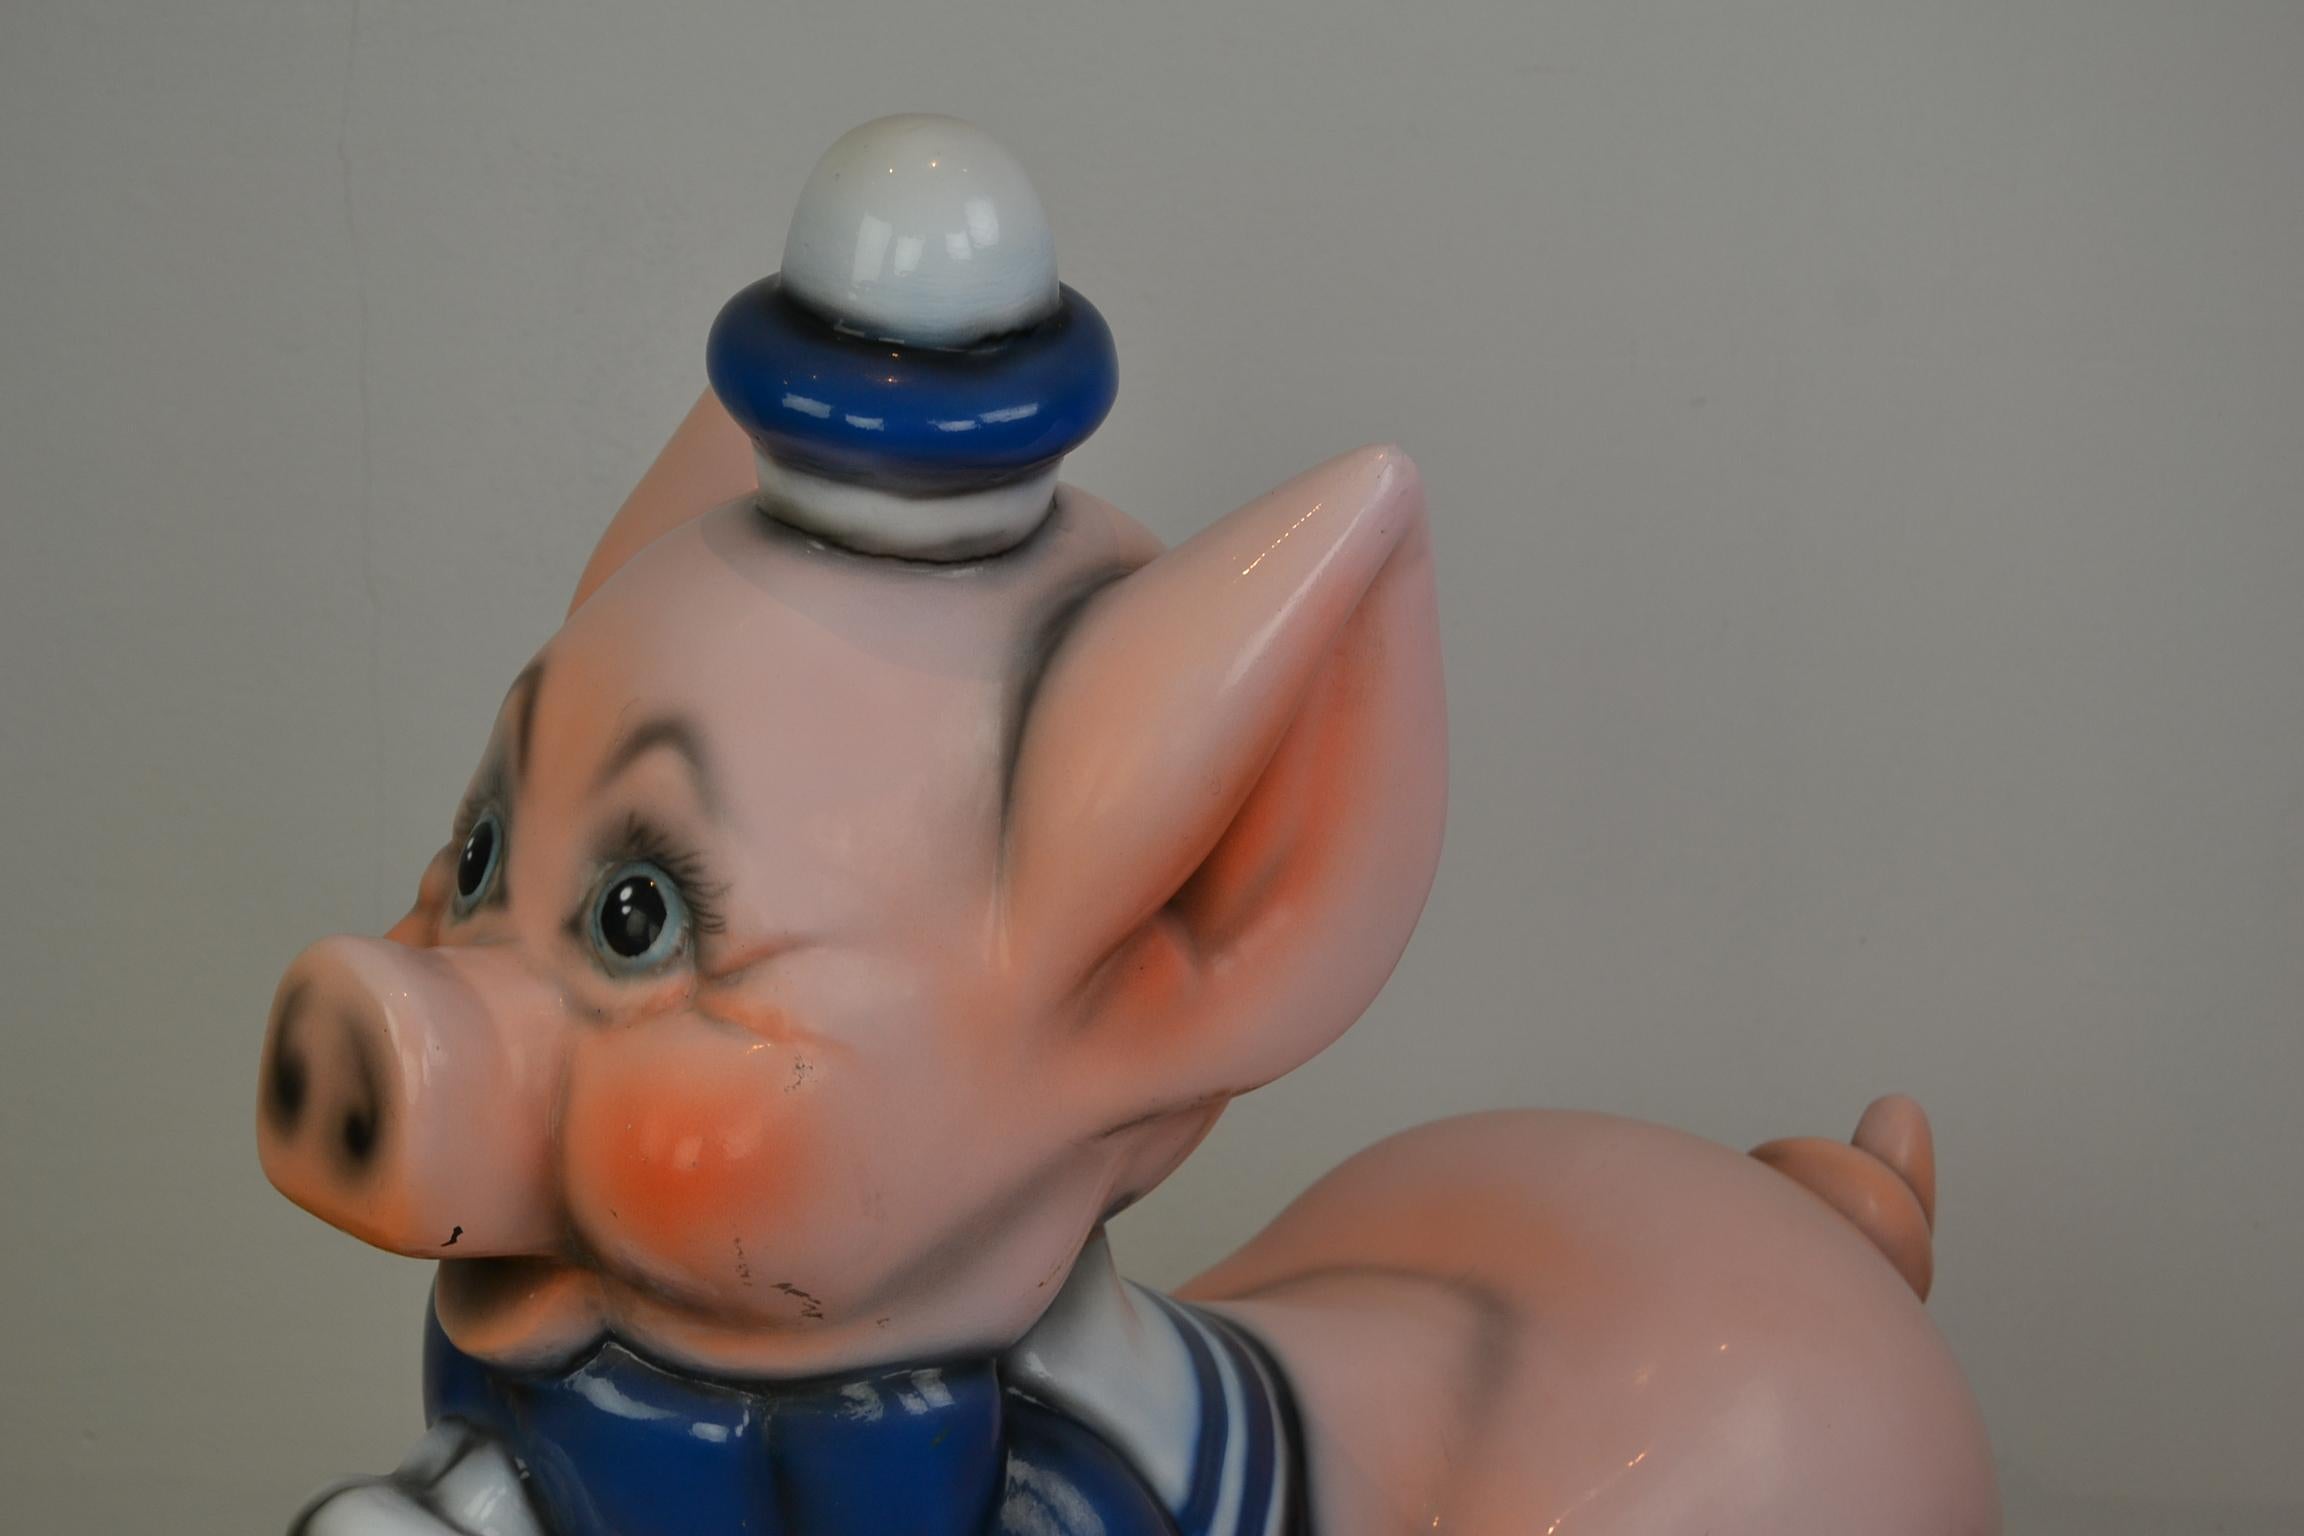 Vintage carousel ride pig. This Carnival ride pig is made of fiberglass and stands on an iron base. This cute animal ride does make us thinking at porky pig or the 3 little pigs.
It's a great decorative object for your interior or business and also